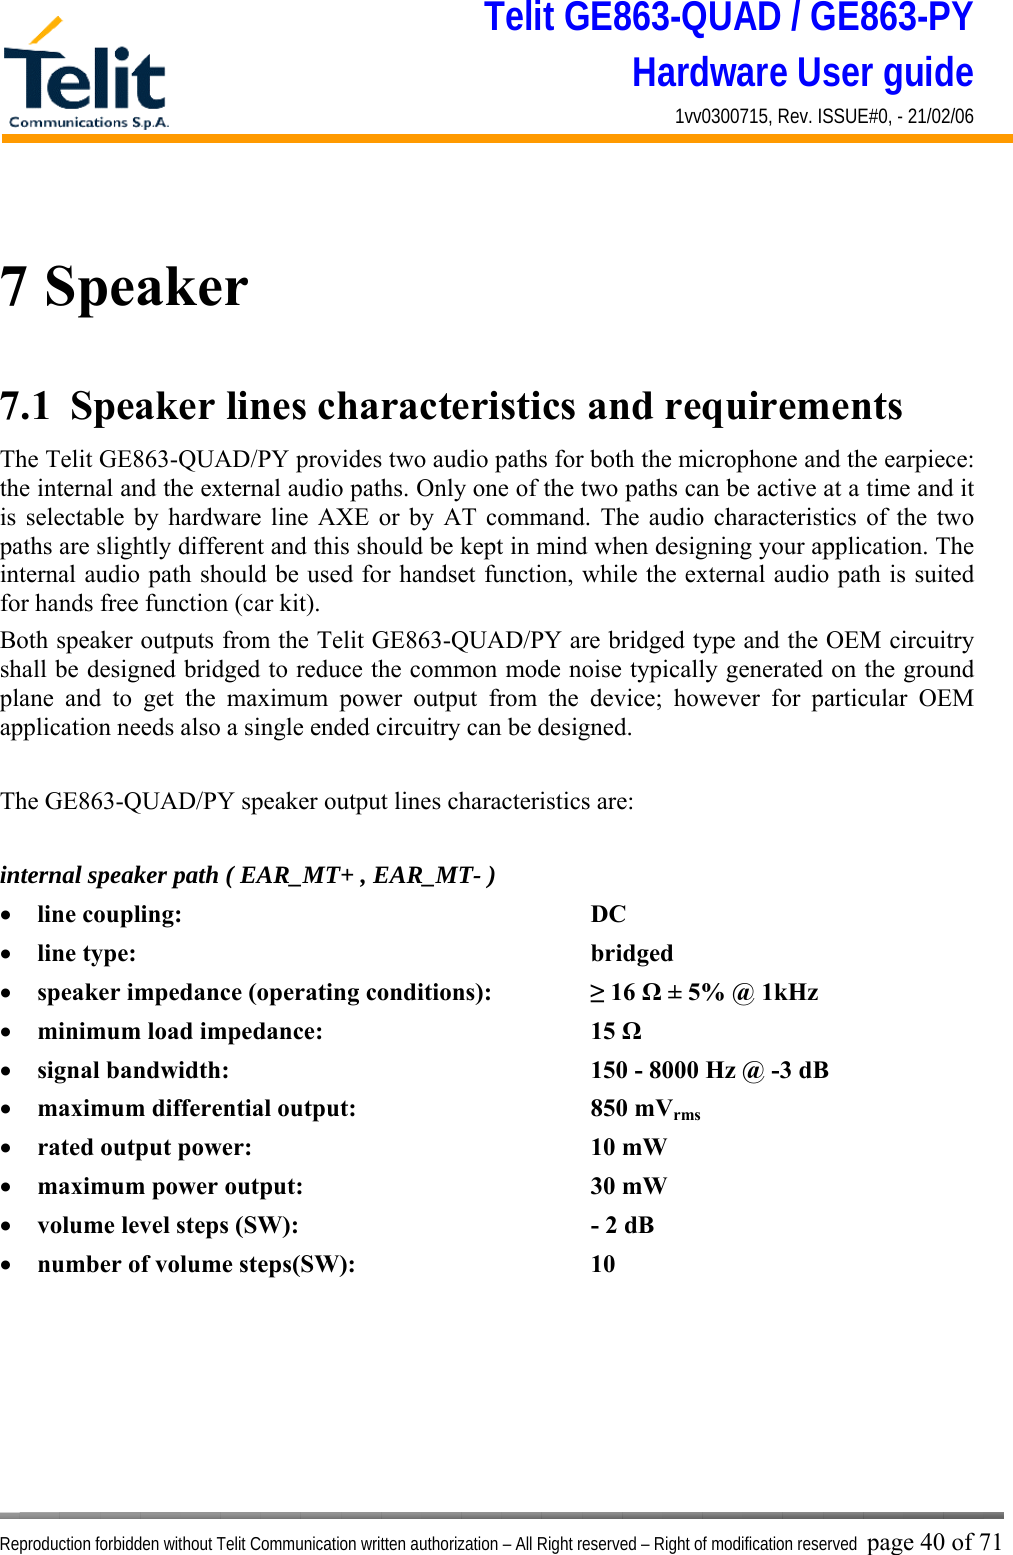 Telit GE863-QUAD / GE863-PY Hardware User guide 1vv0300715, Rev. ISSUE#0, - 21/02/06    Reproduction forbidden without Telit Communication written authorization – All Right reserved – Right of modification reserved page 40 of 71  7 Speaker 7.1  Speaker lines characteristics and requirements  The Telit GE863-QUAD/PY provides two audio paths for both the microphone and the earpiece: the internal and the external audio paths. Only one of the two paths can be active at a time and it is selectable by hardware line AXE or by AT command. The audio characteristics of the two paths are slightly different and this should be kept in mind when designing your application. The internal audio path should be used for handset function, while the external audio path is suited for hands free function (car kit). Both speaker outputs from the Telit GE863-QUAD/PY are bridged type and the OEM circuitry shall be designed bridged to reduce the common mode noise typically generated on the ground plane and to get the maximum power output from the device; however for particular OEM application needs also a single ended circuitry can be designed.  The GE863-QUAD/PY speaker output lines characteristics are:  internal speaker path ( EAR_MT+ , EAR_MT- ) •  line coupling:      DC  •  line type:       bridged •  speaker impedance (operating conditions):    ≥ 16 Ω ± 5% @ 1kHz •  minimum load impedance:    15 Ω •  signal bandwidth:          150 - 8000 Hz @ -3 dB  •  maximum differential output:    850 mVrms •  rated output power:     10 mW •  maximum power output:    30 mW •  volume level steps (SW):        - 2 dB •  number of volume steps(SW):    10       